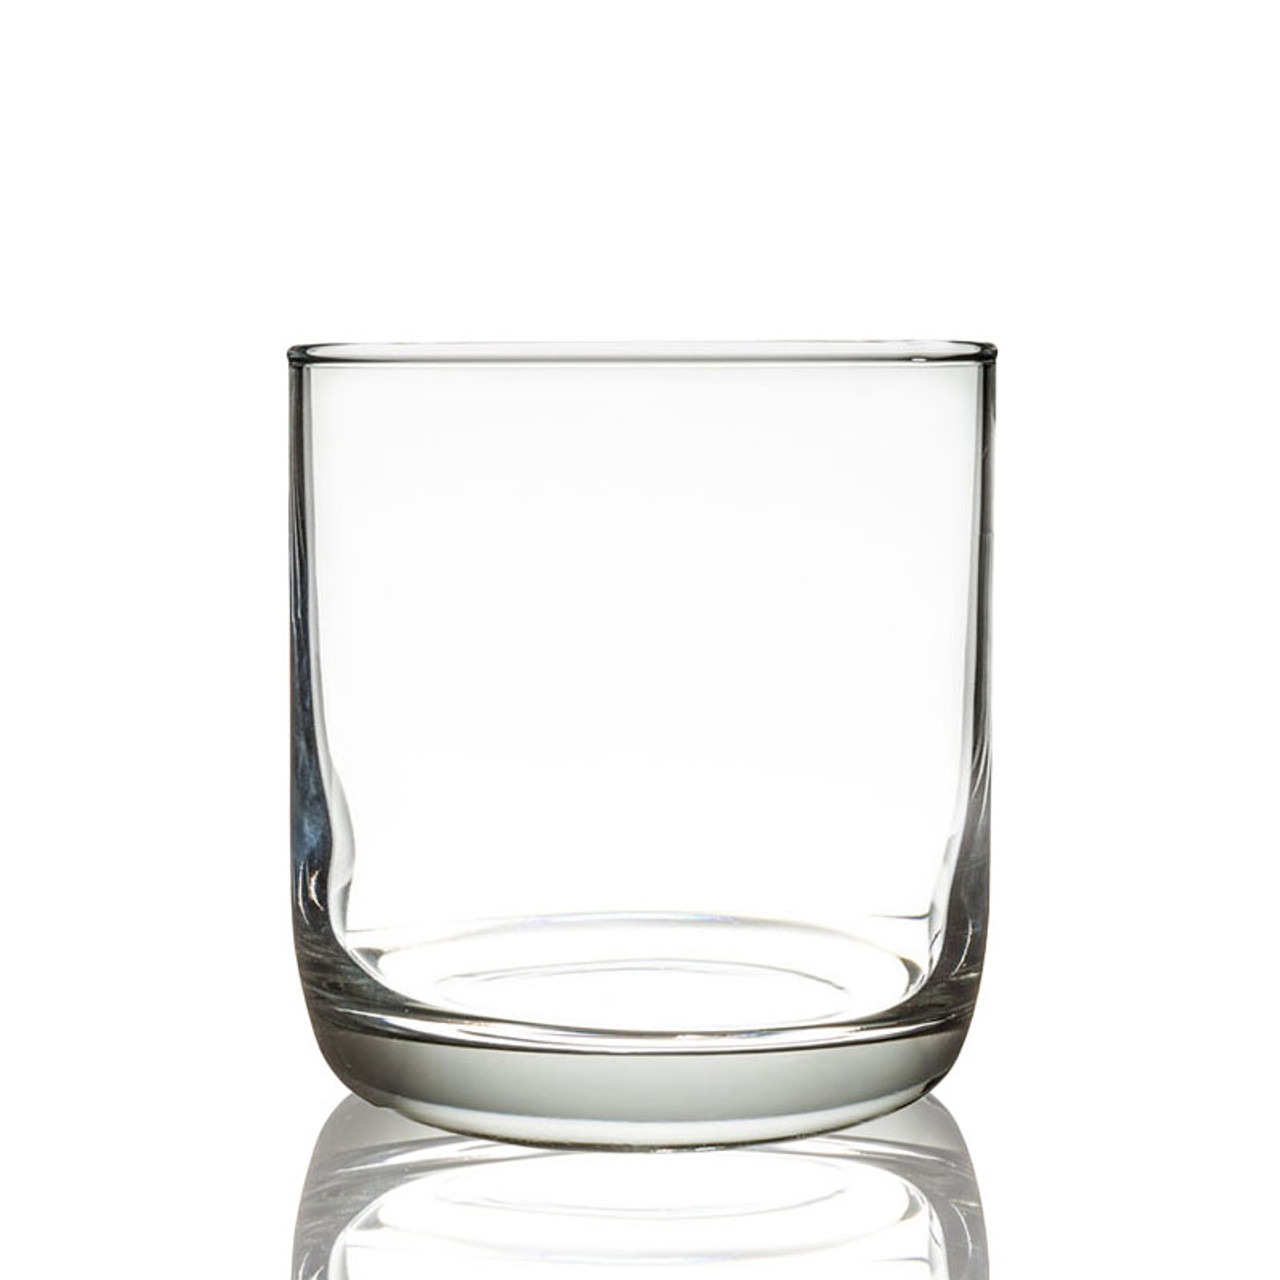 Clear Straight-Sided Tumbler Jar - 10 oz. (Case of 12)